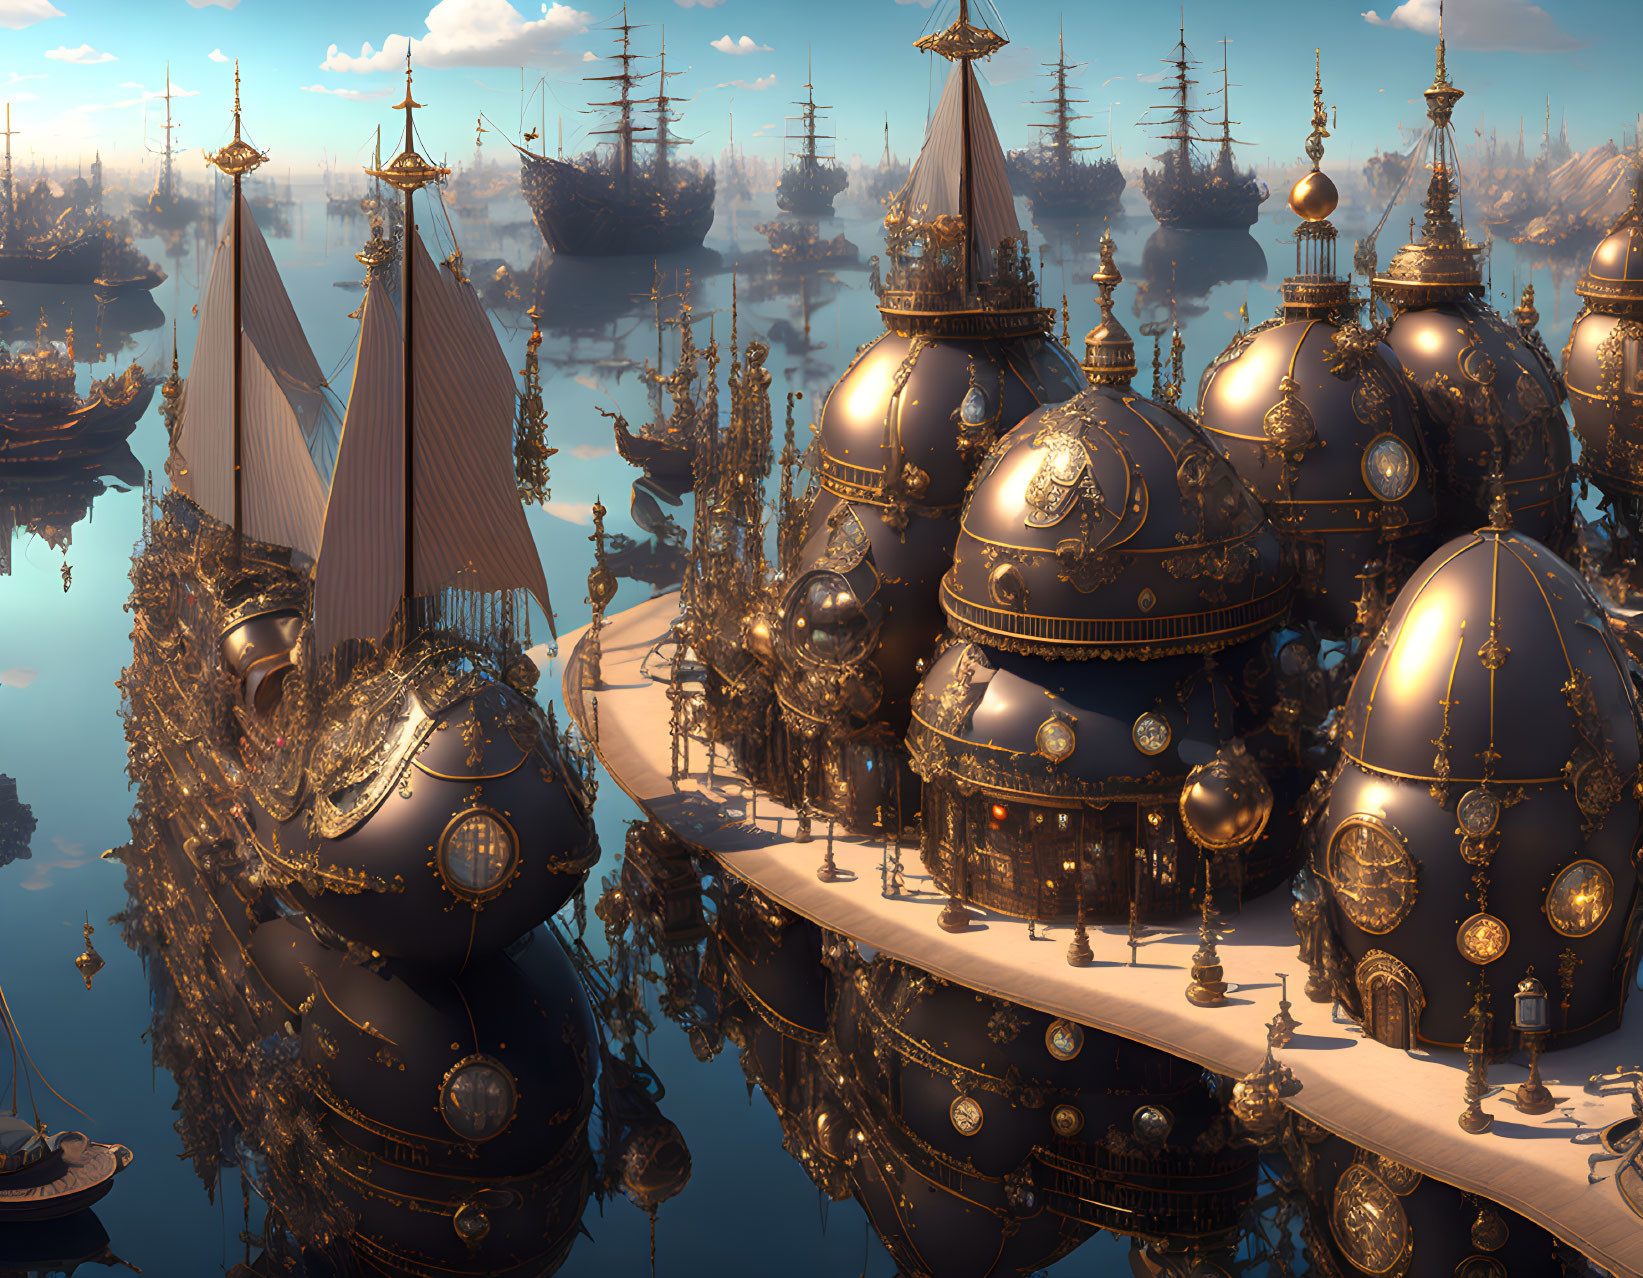 Fantasy Steampunk Harbor with Golden Domes & Vintage Ships